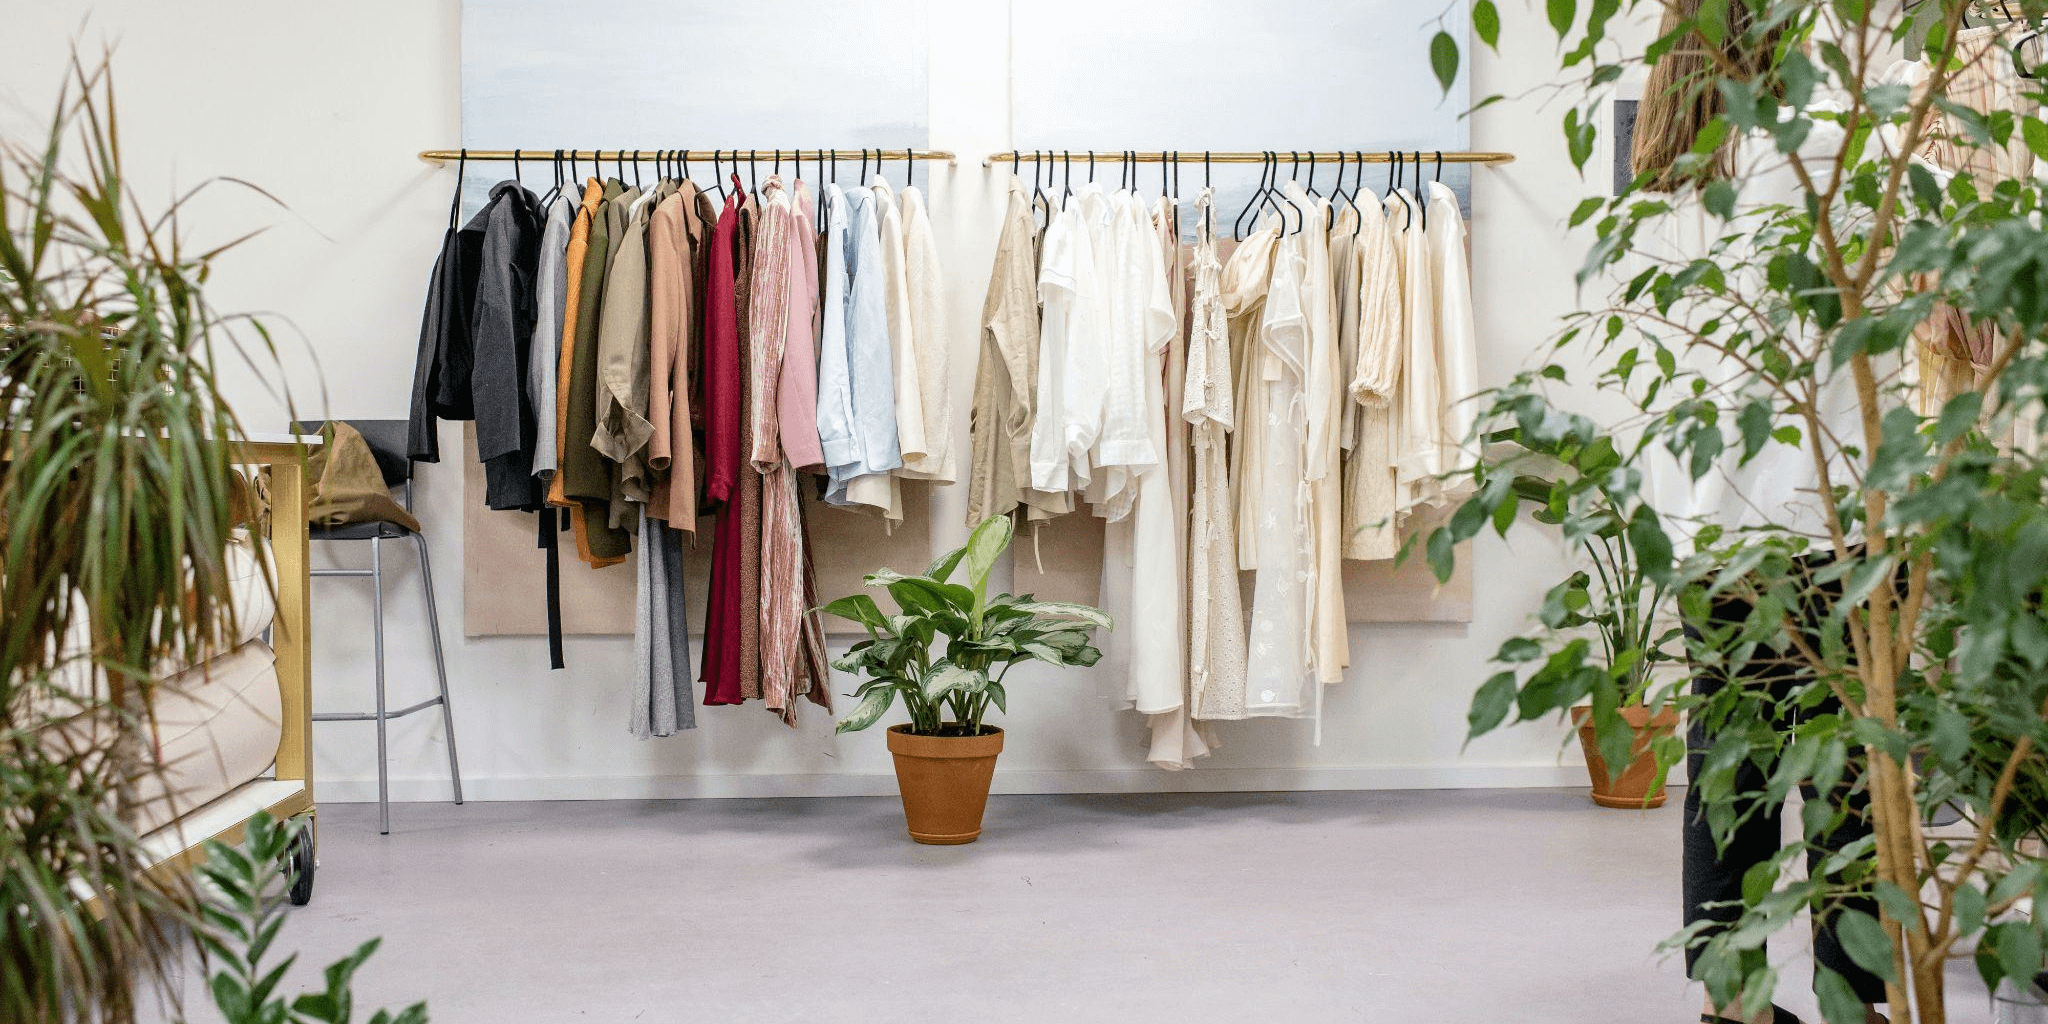 A Guide To Shopping For Plus-Size Clothing